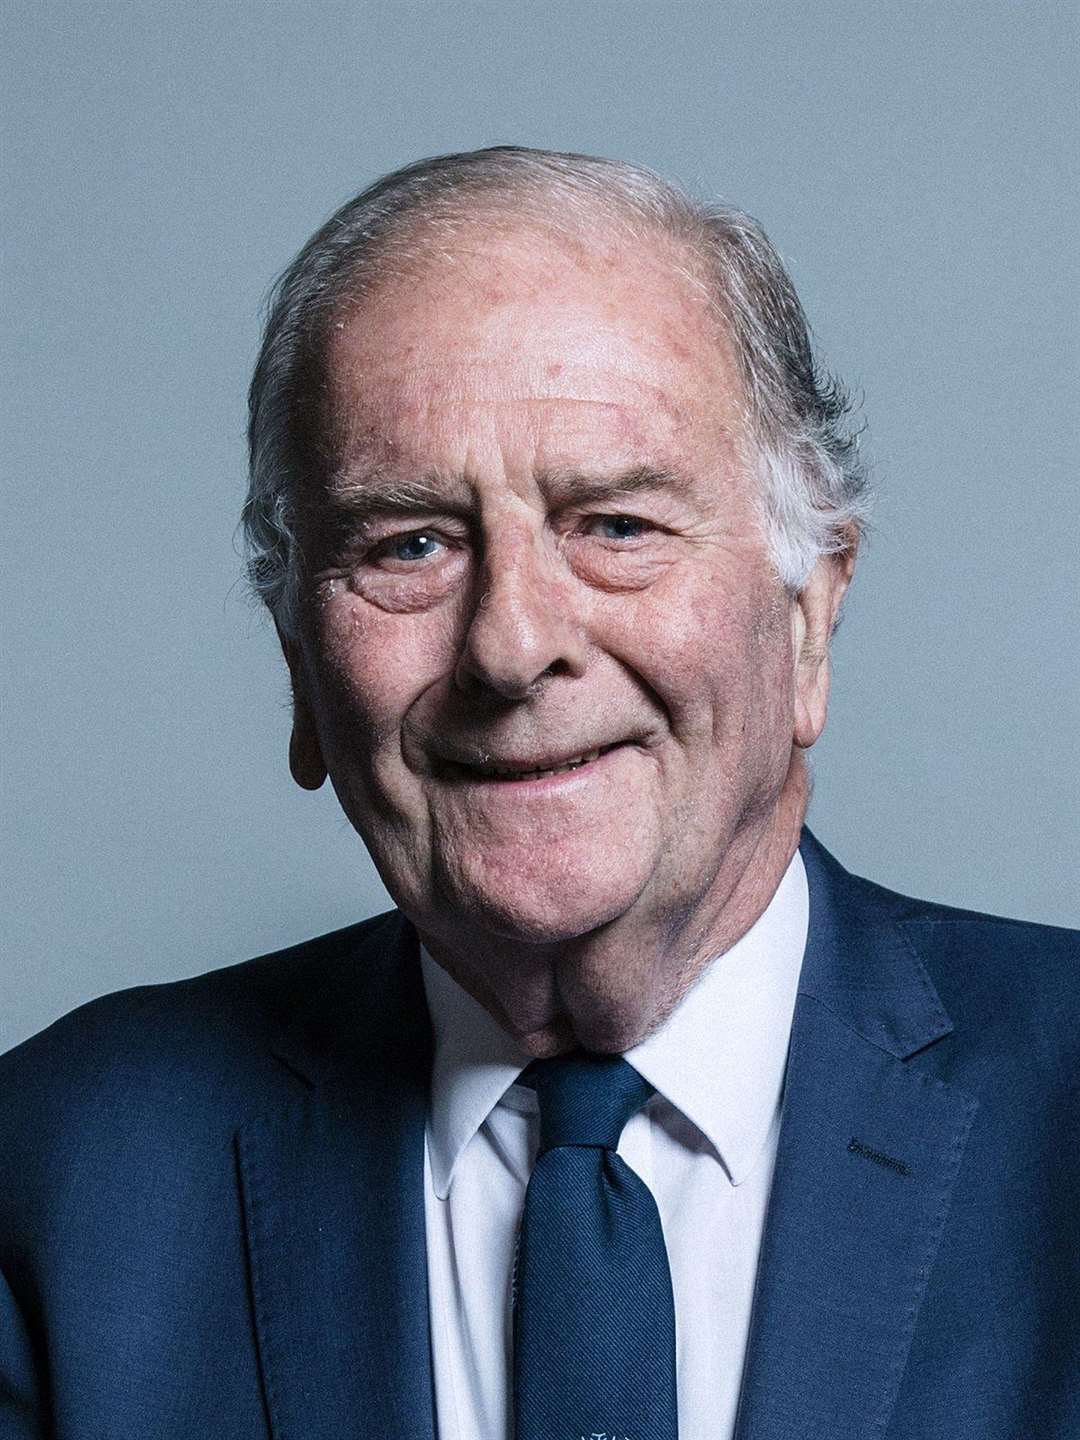 MP for North Thanet Sir Roger Gale has objected against the plans